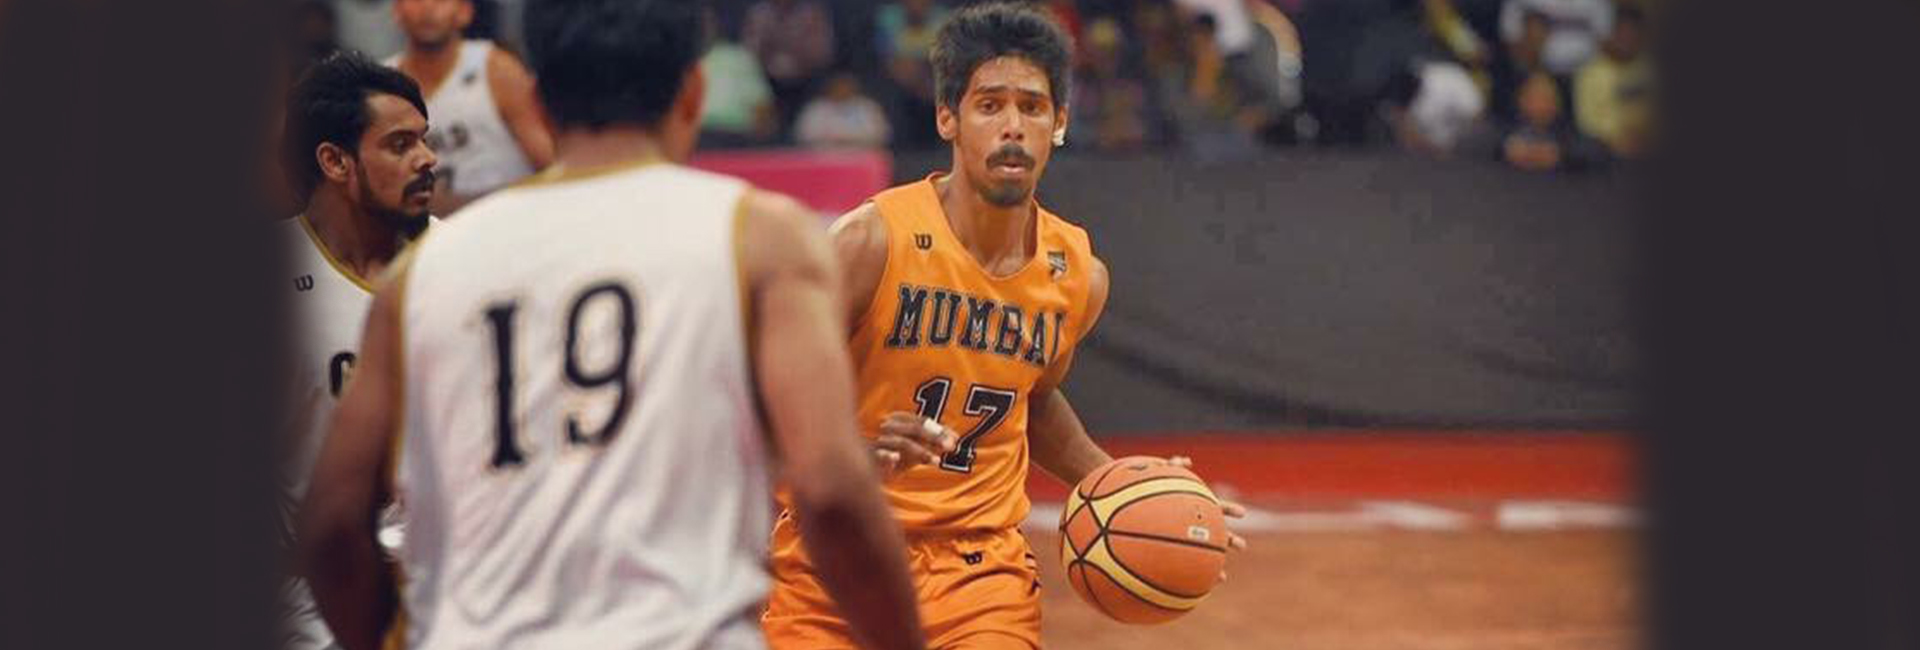 Slam dunk: India, Spain, or US, basketball pro Prudhvi Reddy ‘shoots’ to thrill everywhere